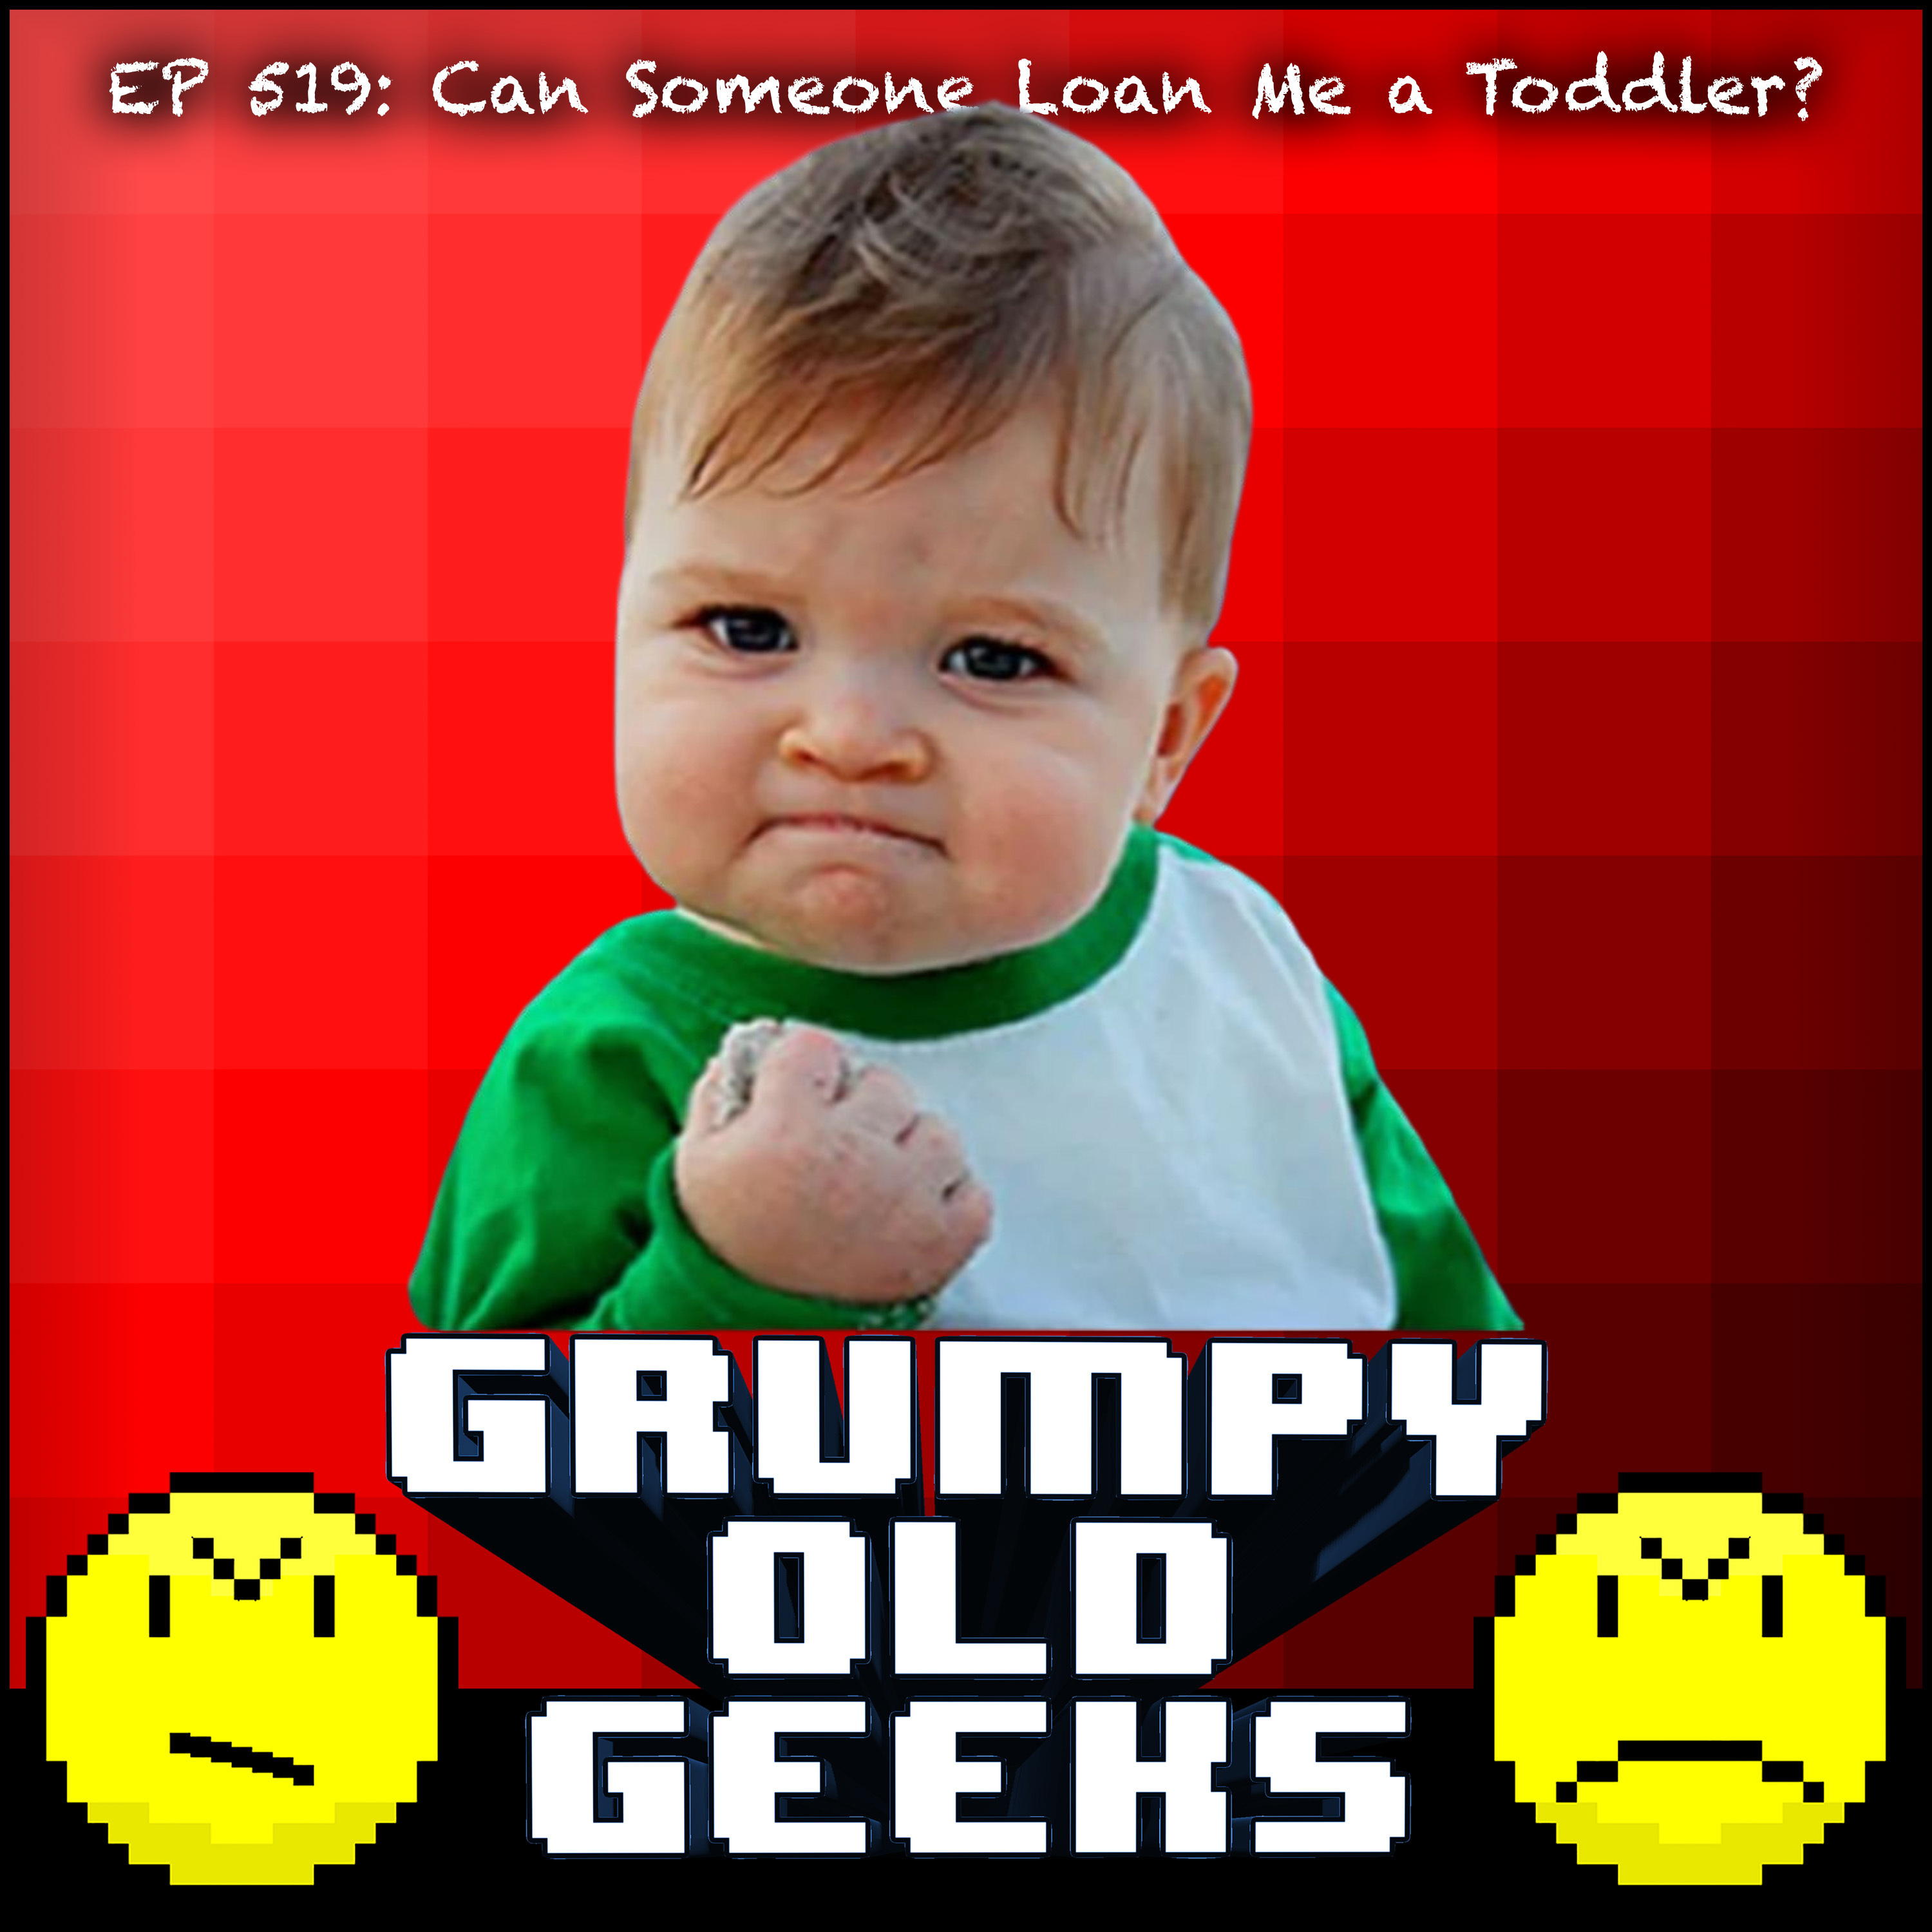 519: Can Someone Loan Me a Toddler?